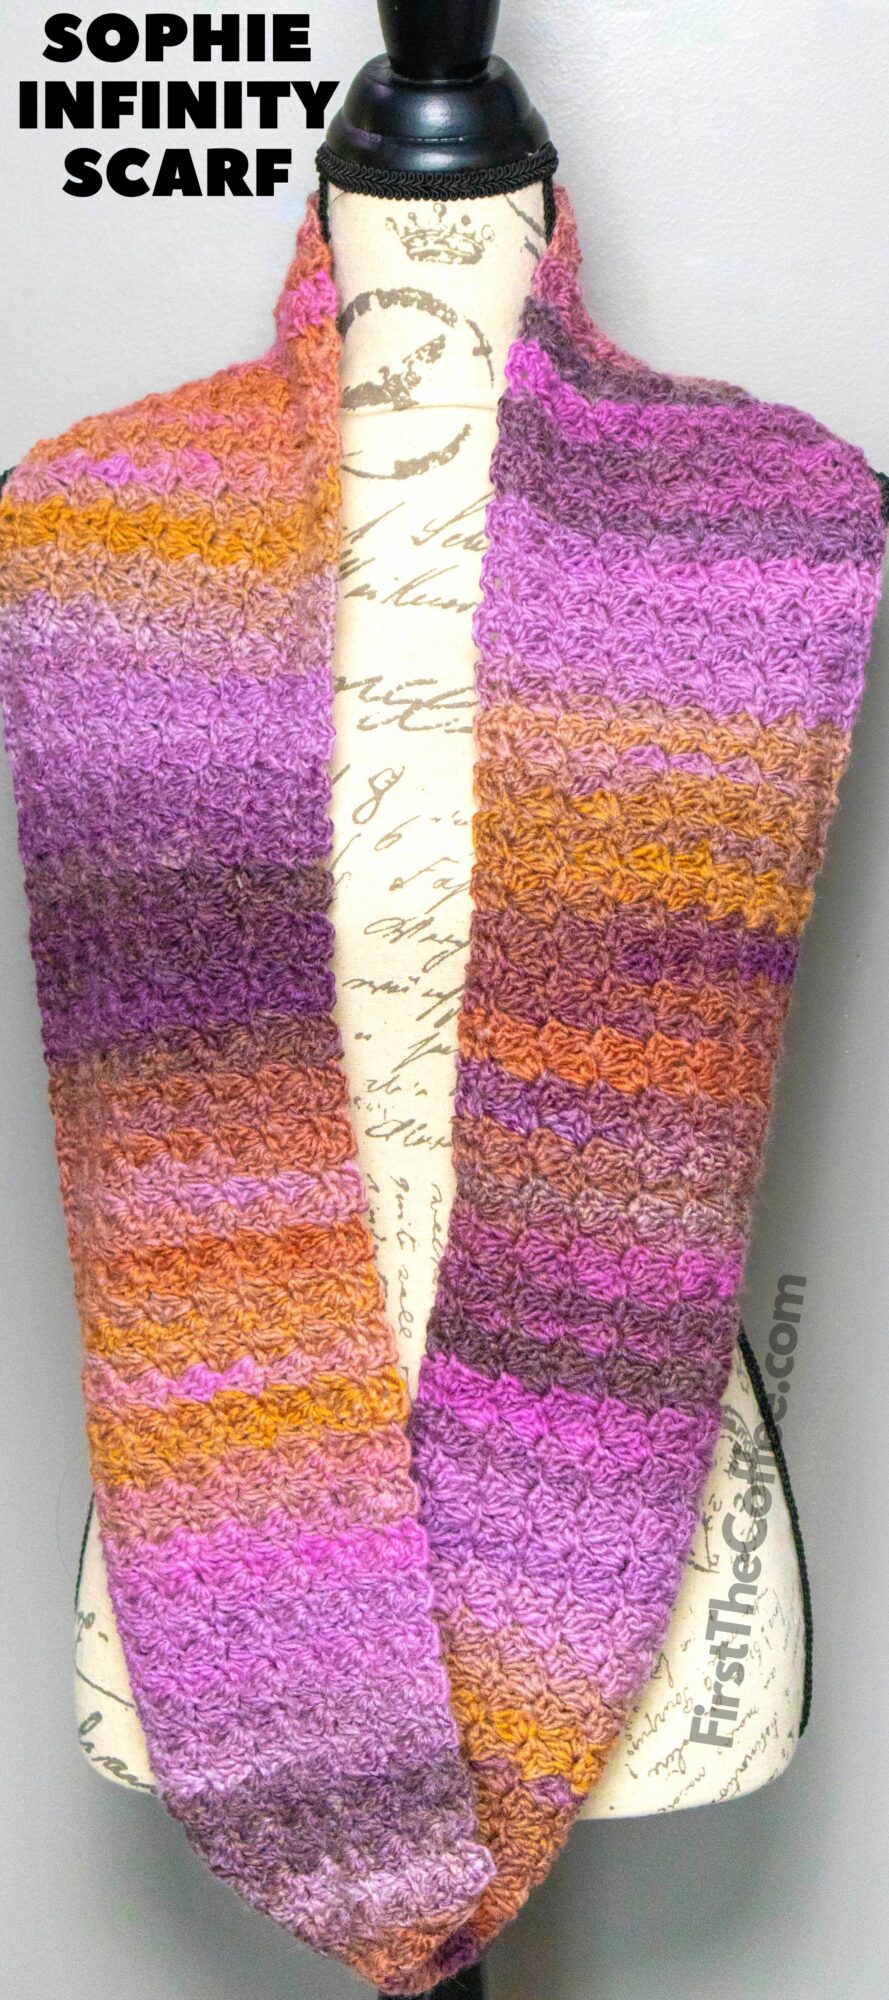 Sophie Infinity Scarf